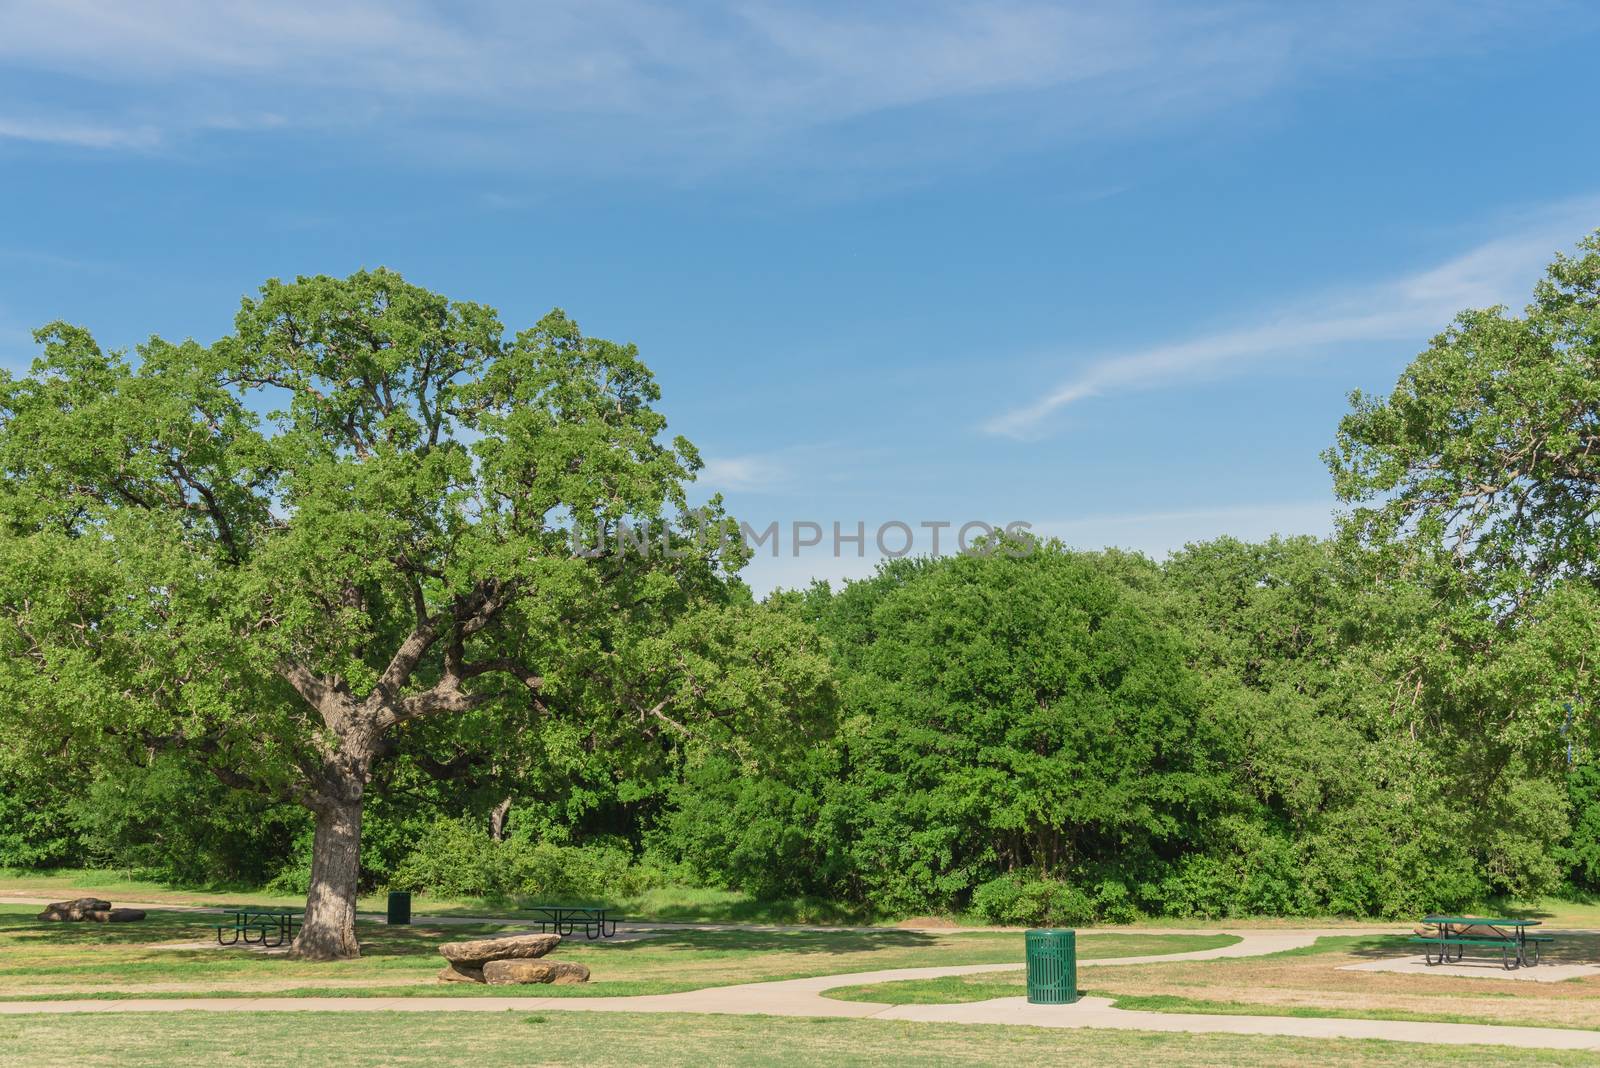 Picnic tables at public nature park in Texas, America by trongnguyen